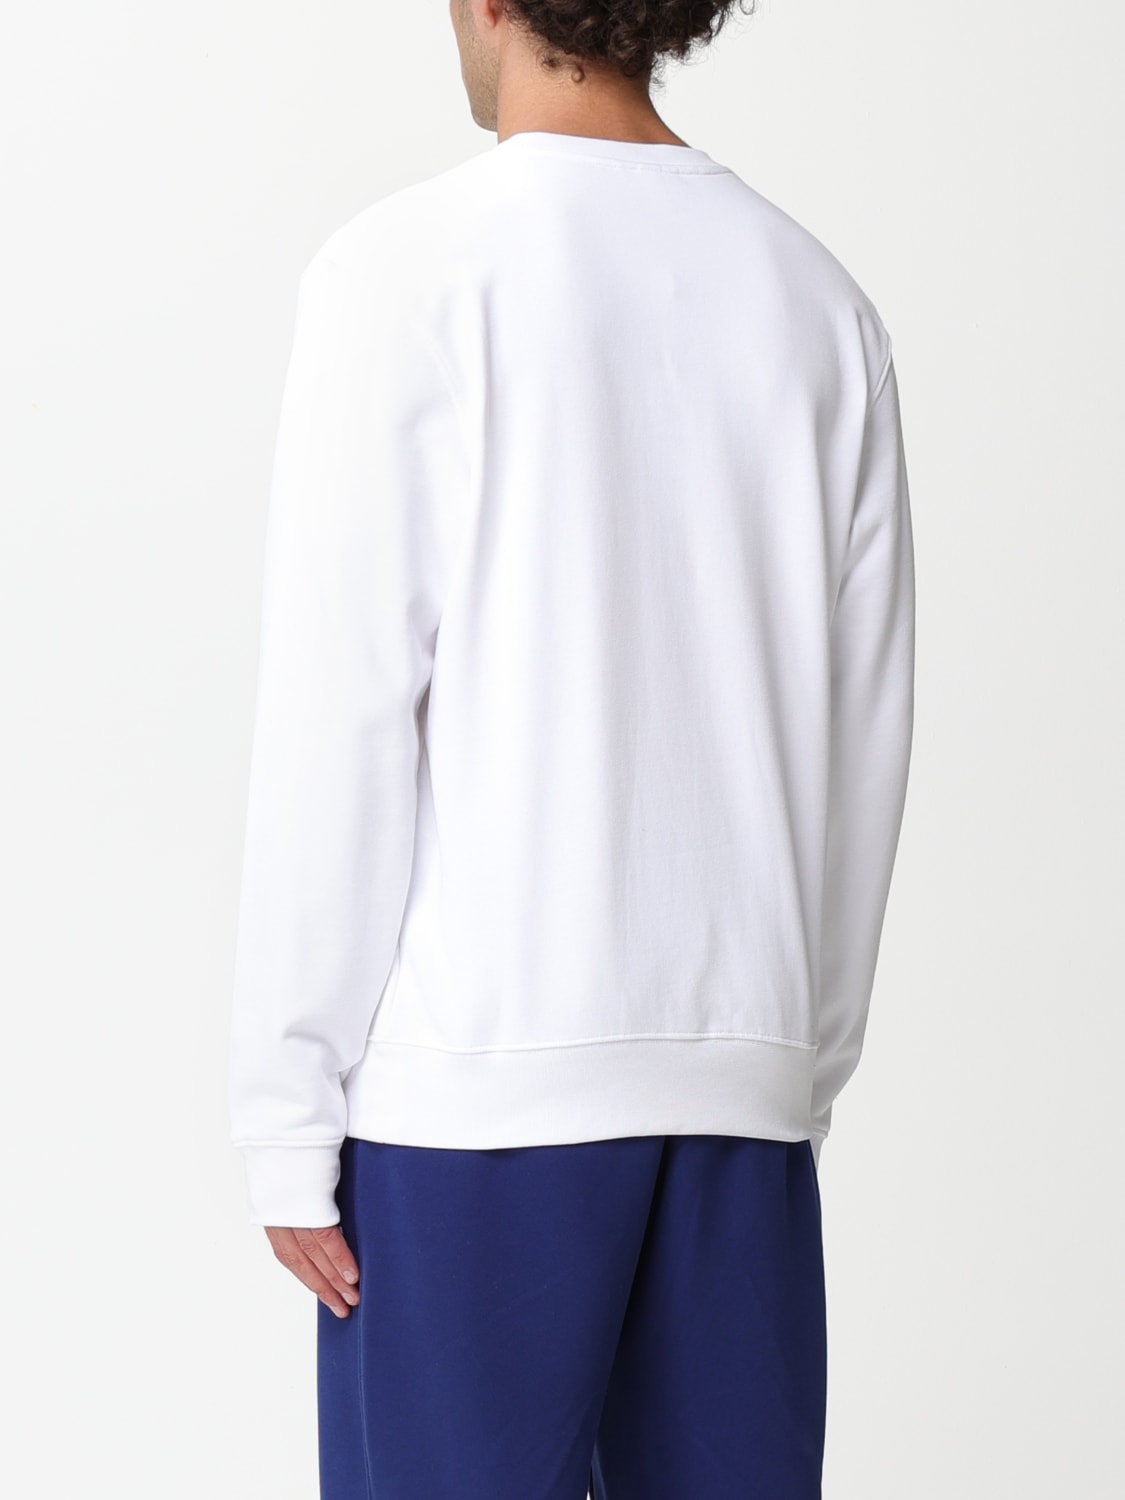 LACOSTE: sweater for man - White | Lacoste sweater SH1281 online at ...